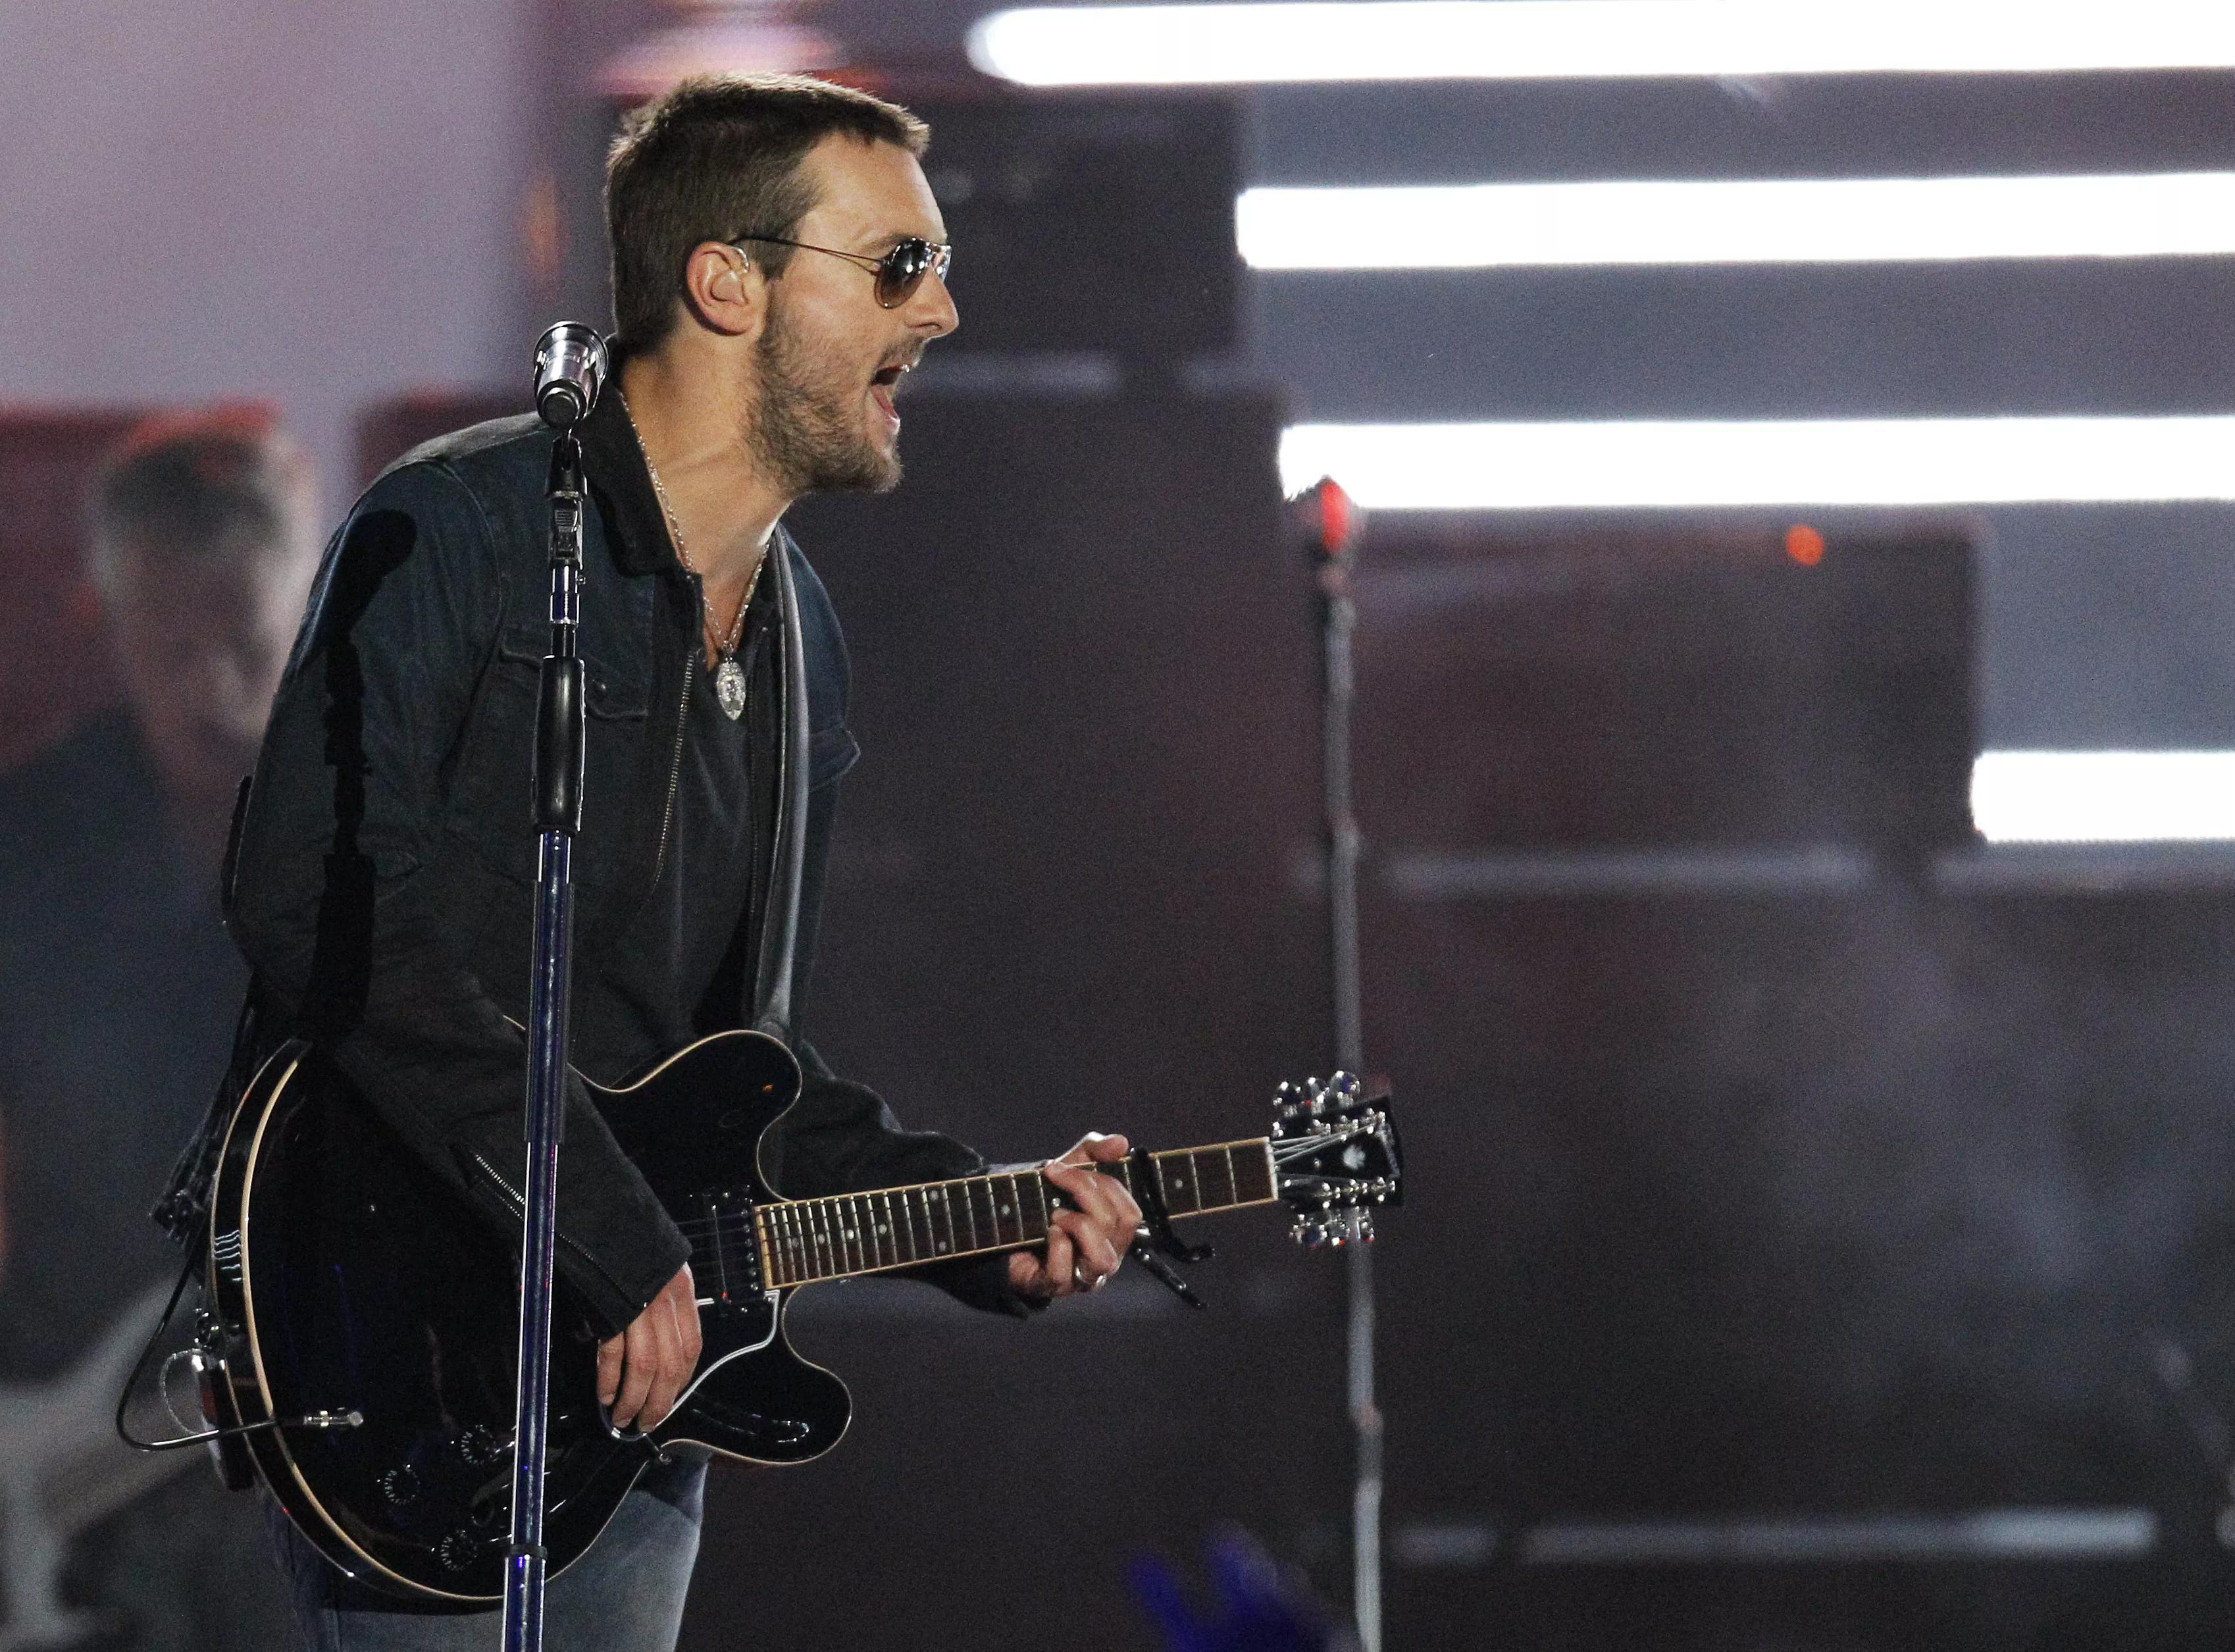 eric-church-performs-during-the-2014-cmt-music-awards-in-nashville-2